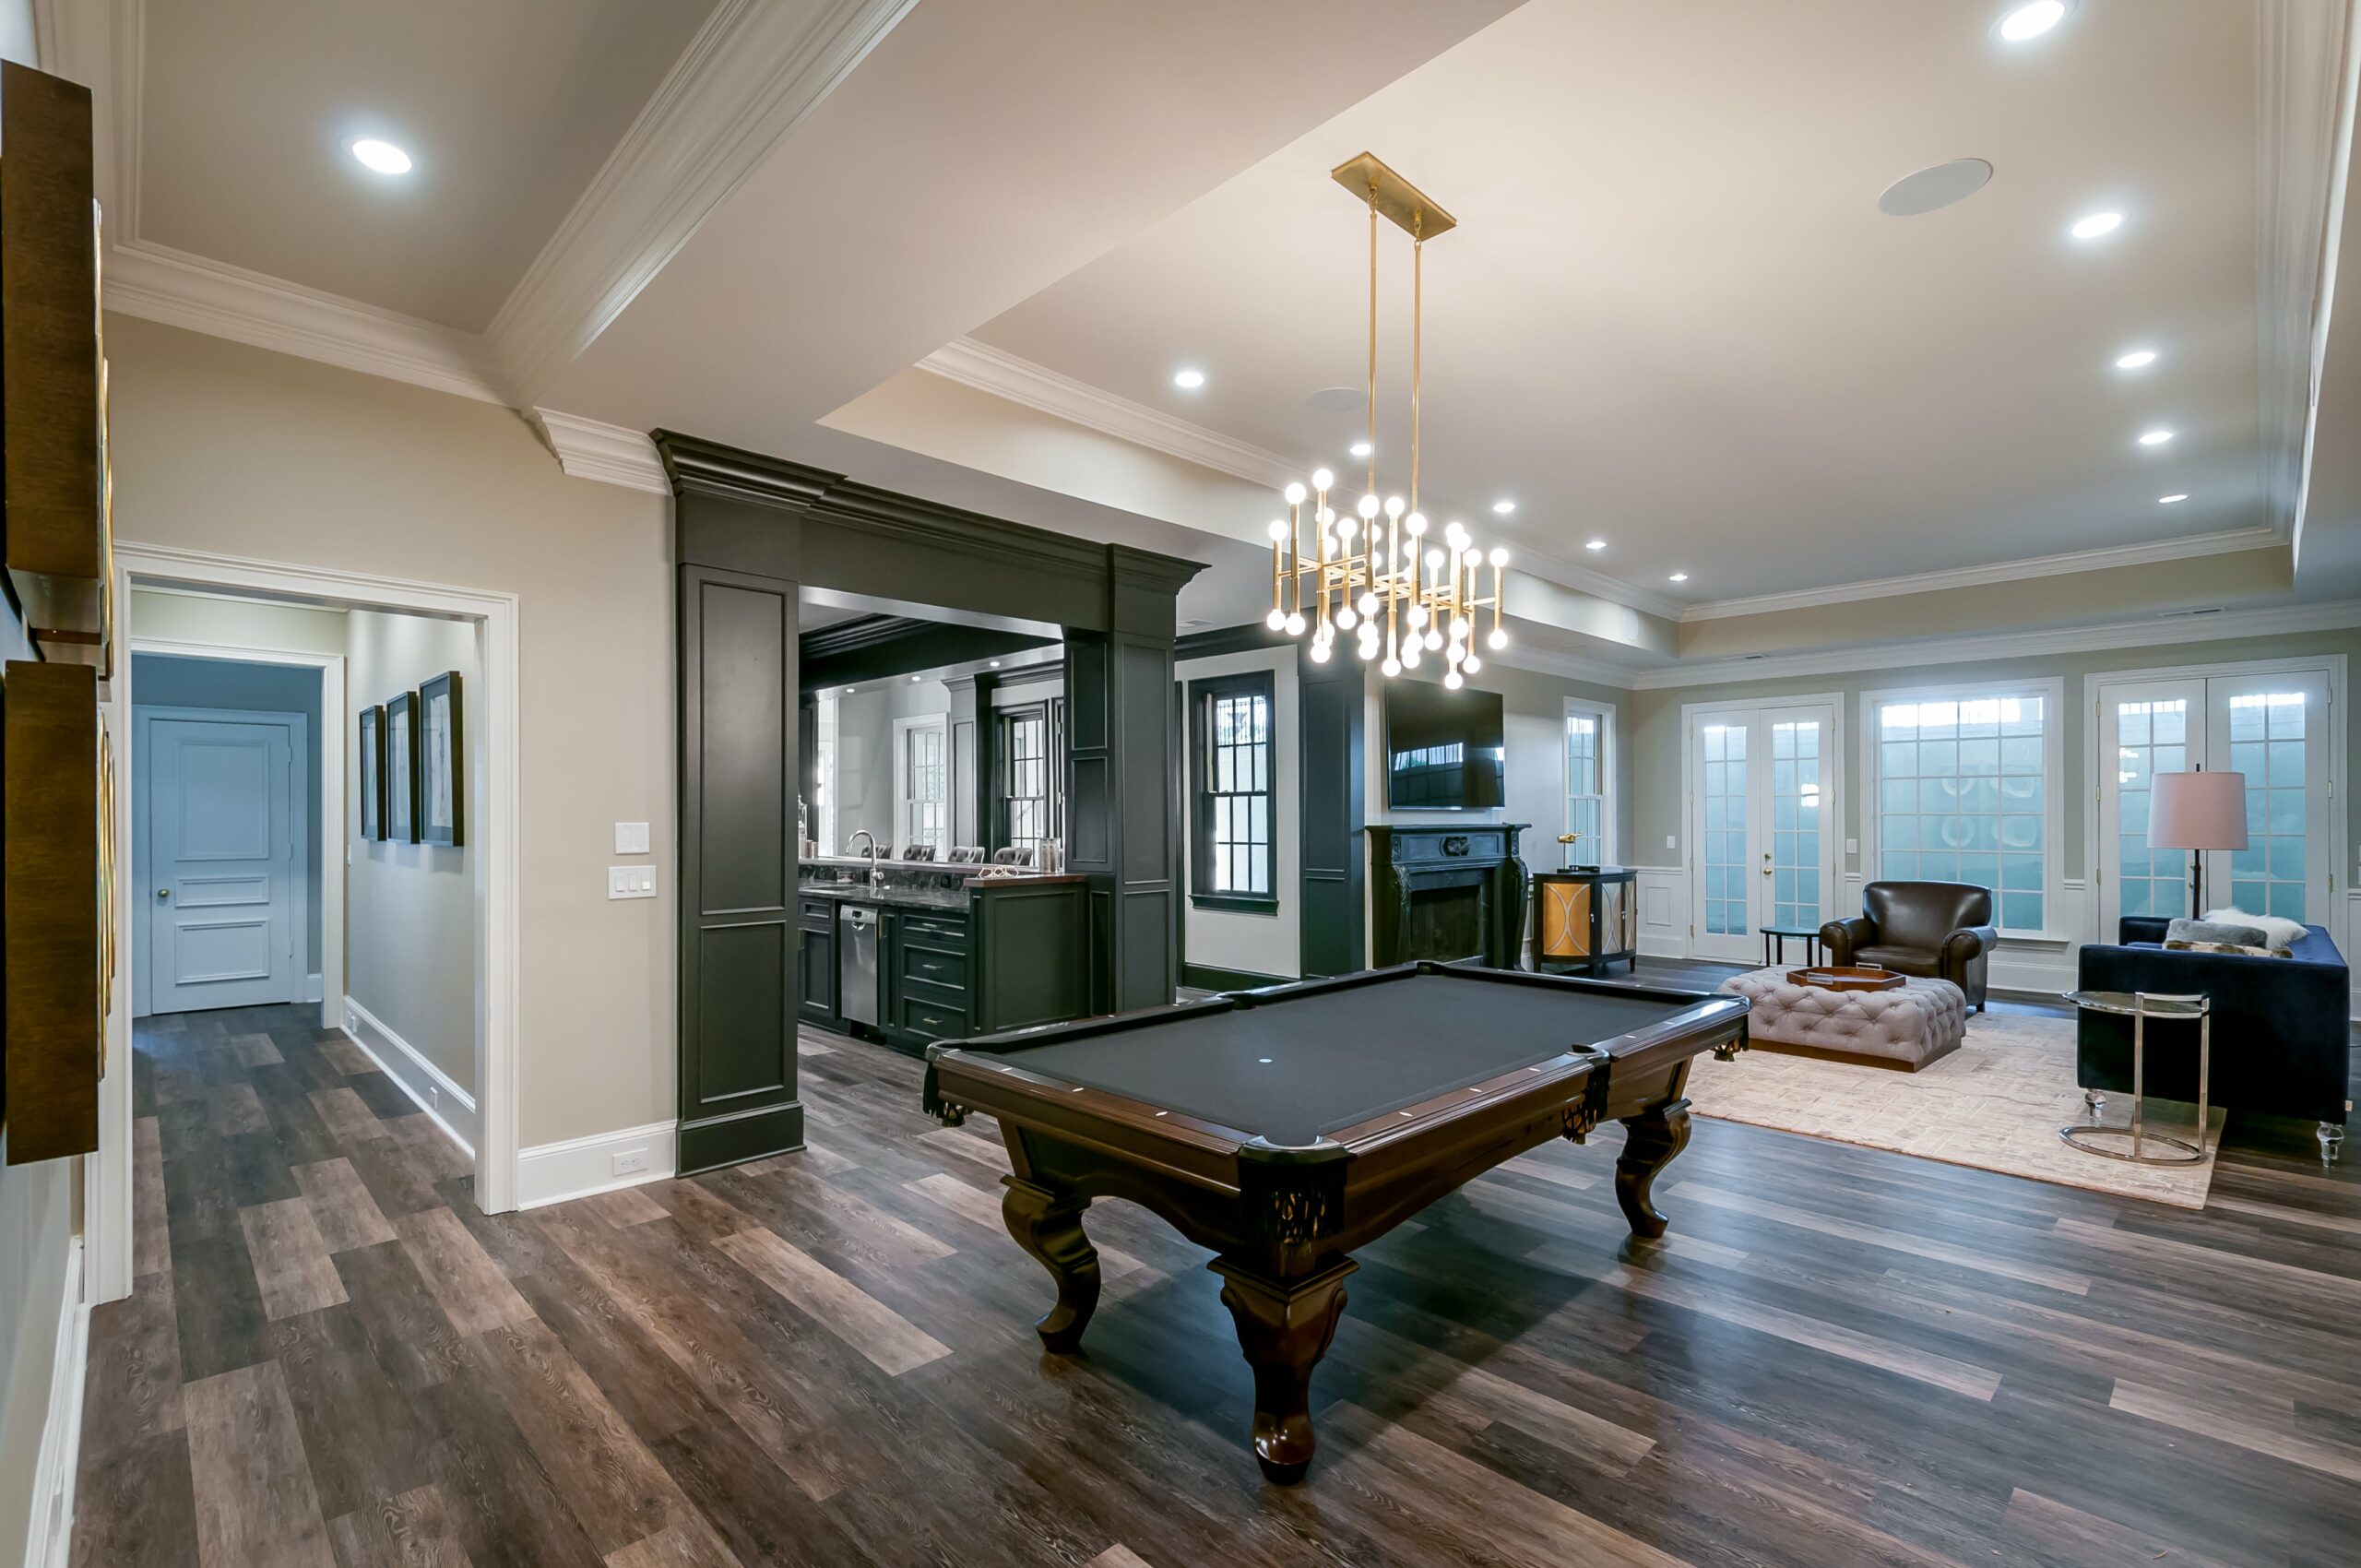 Basement remodel with billiards table and game room